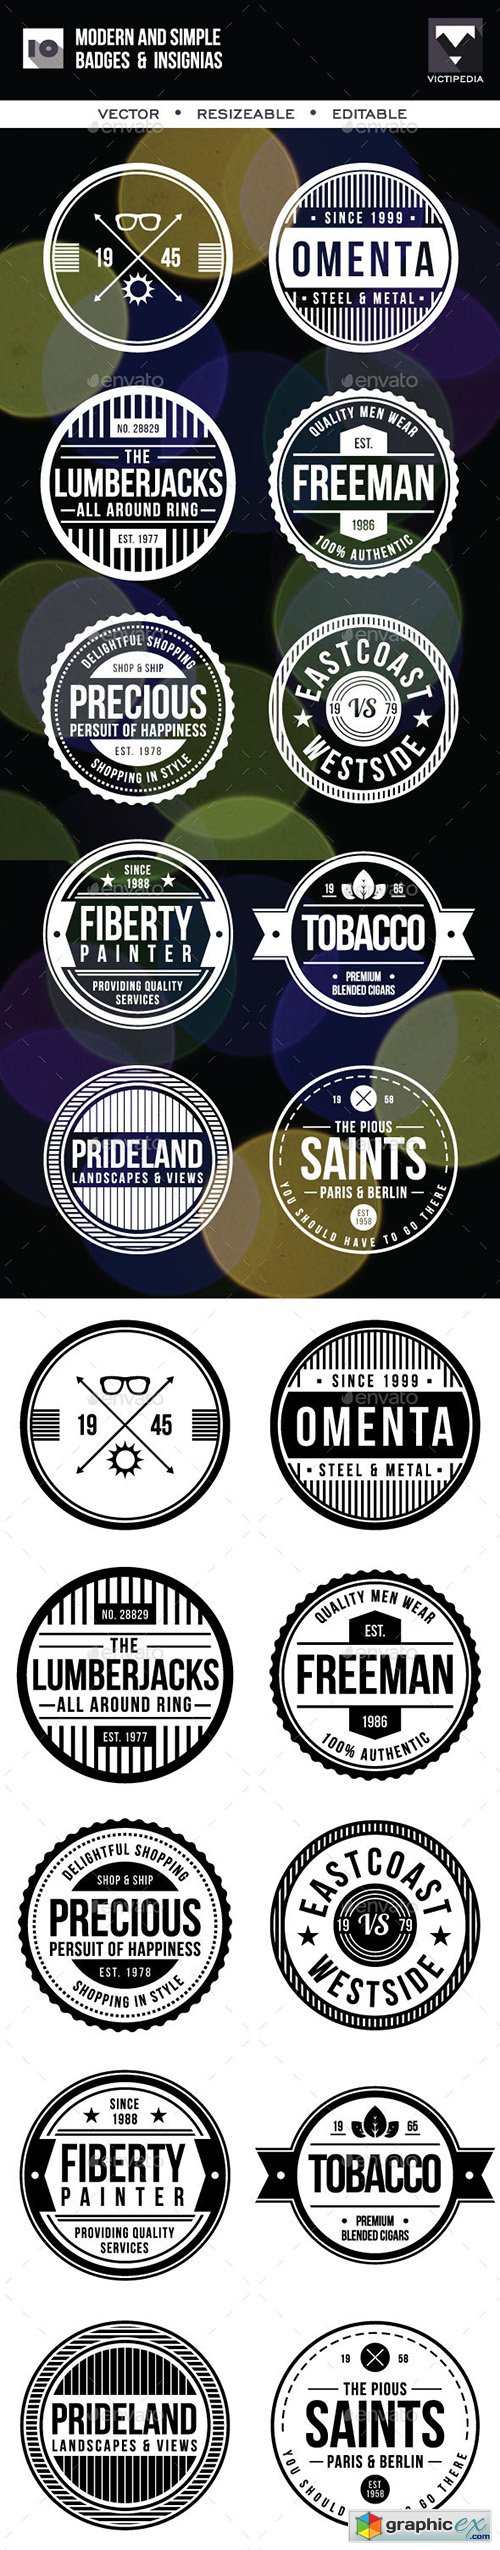 10 Modern And SImple Badges